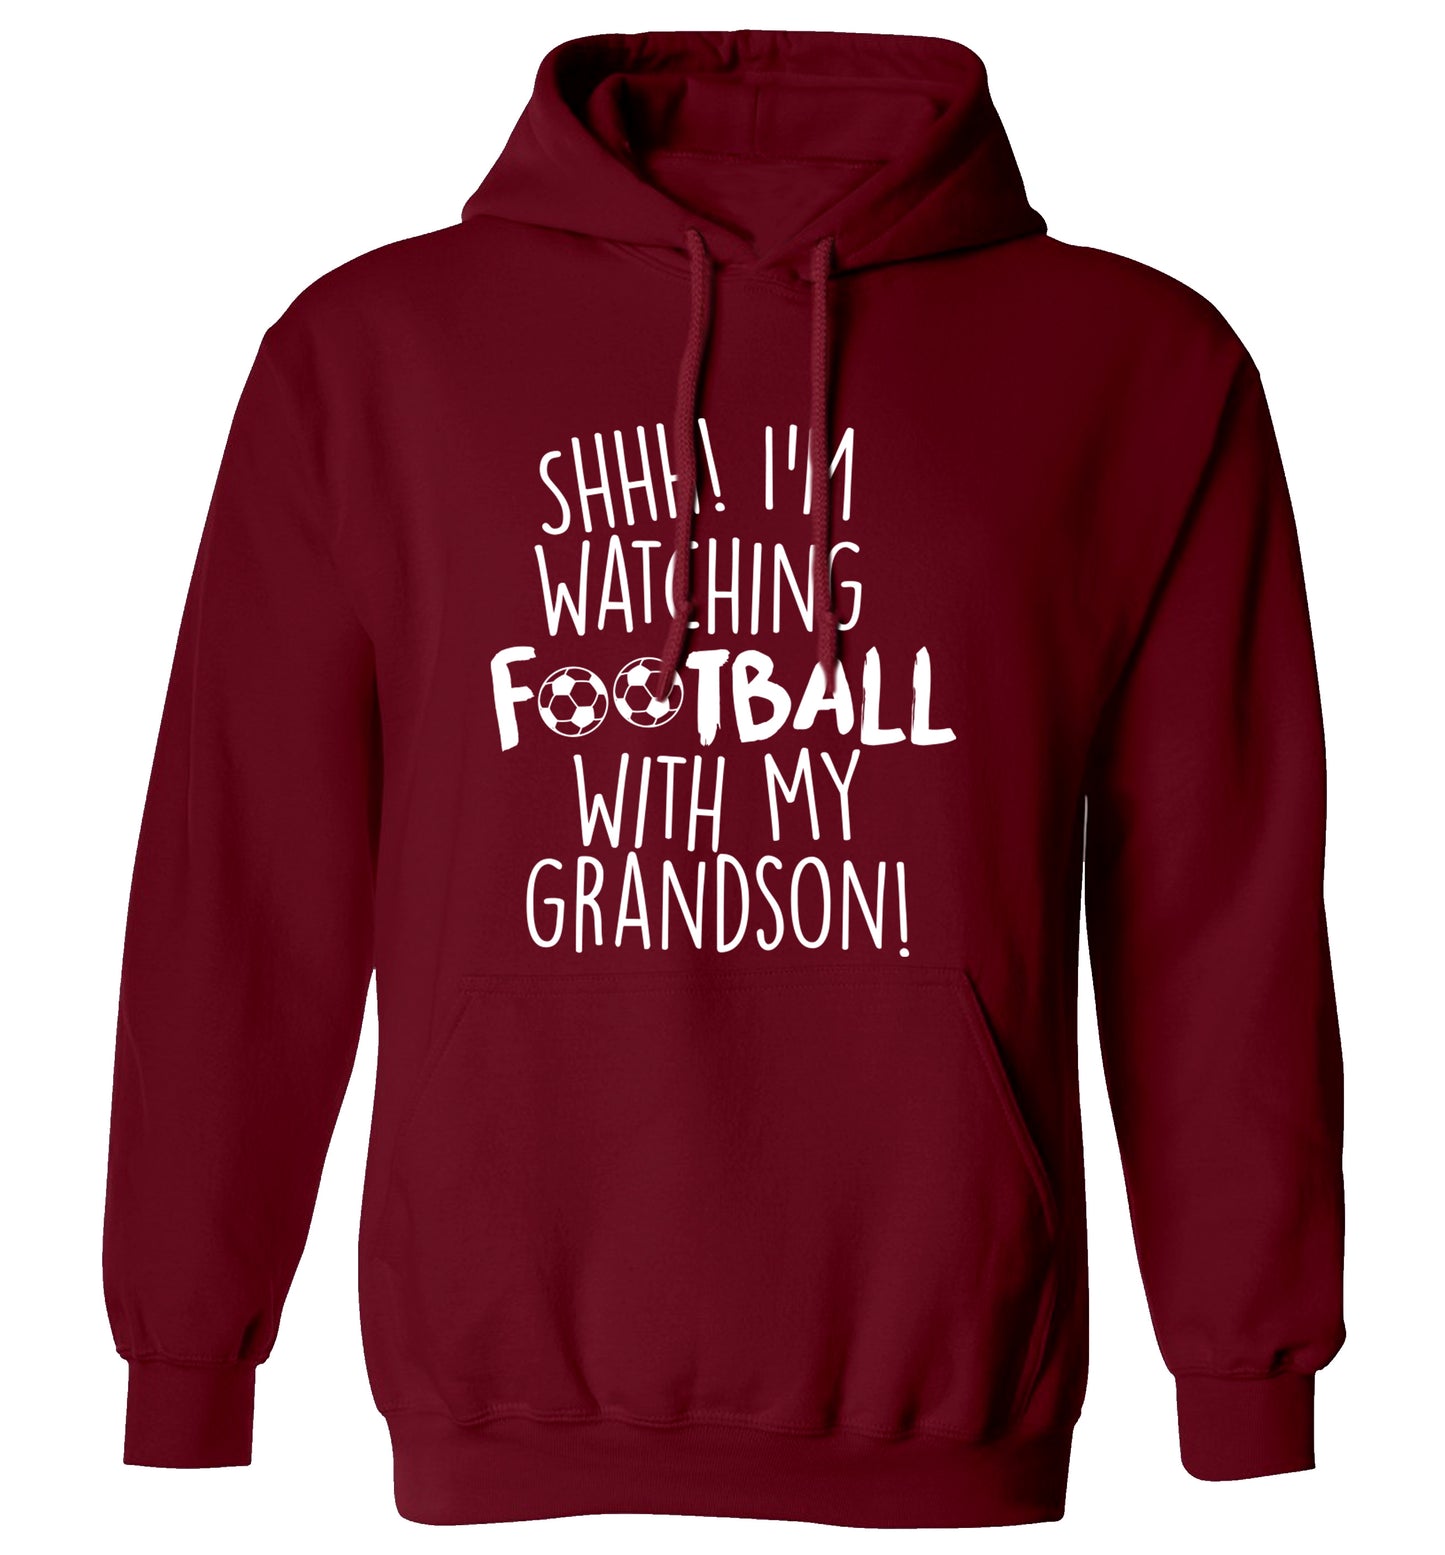 Shhh I'm watching football with my grandson adults unisexmaroon hoodie 2XL